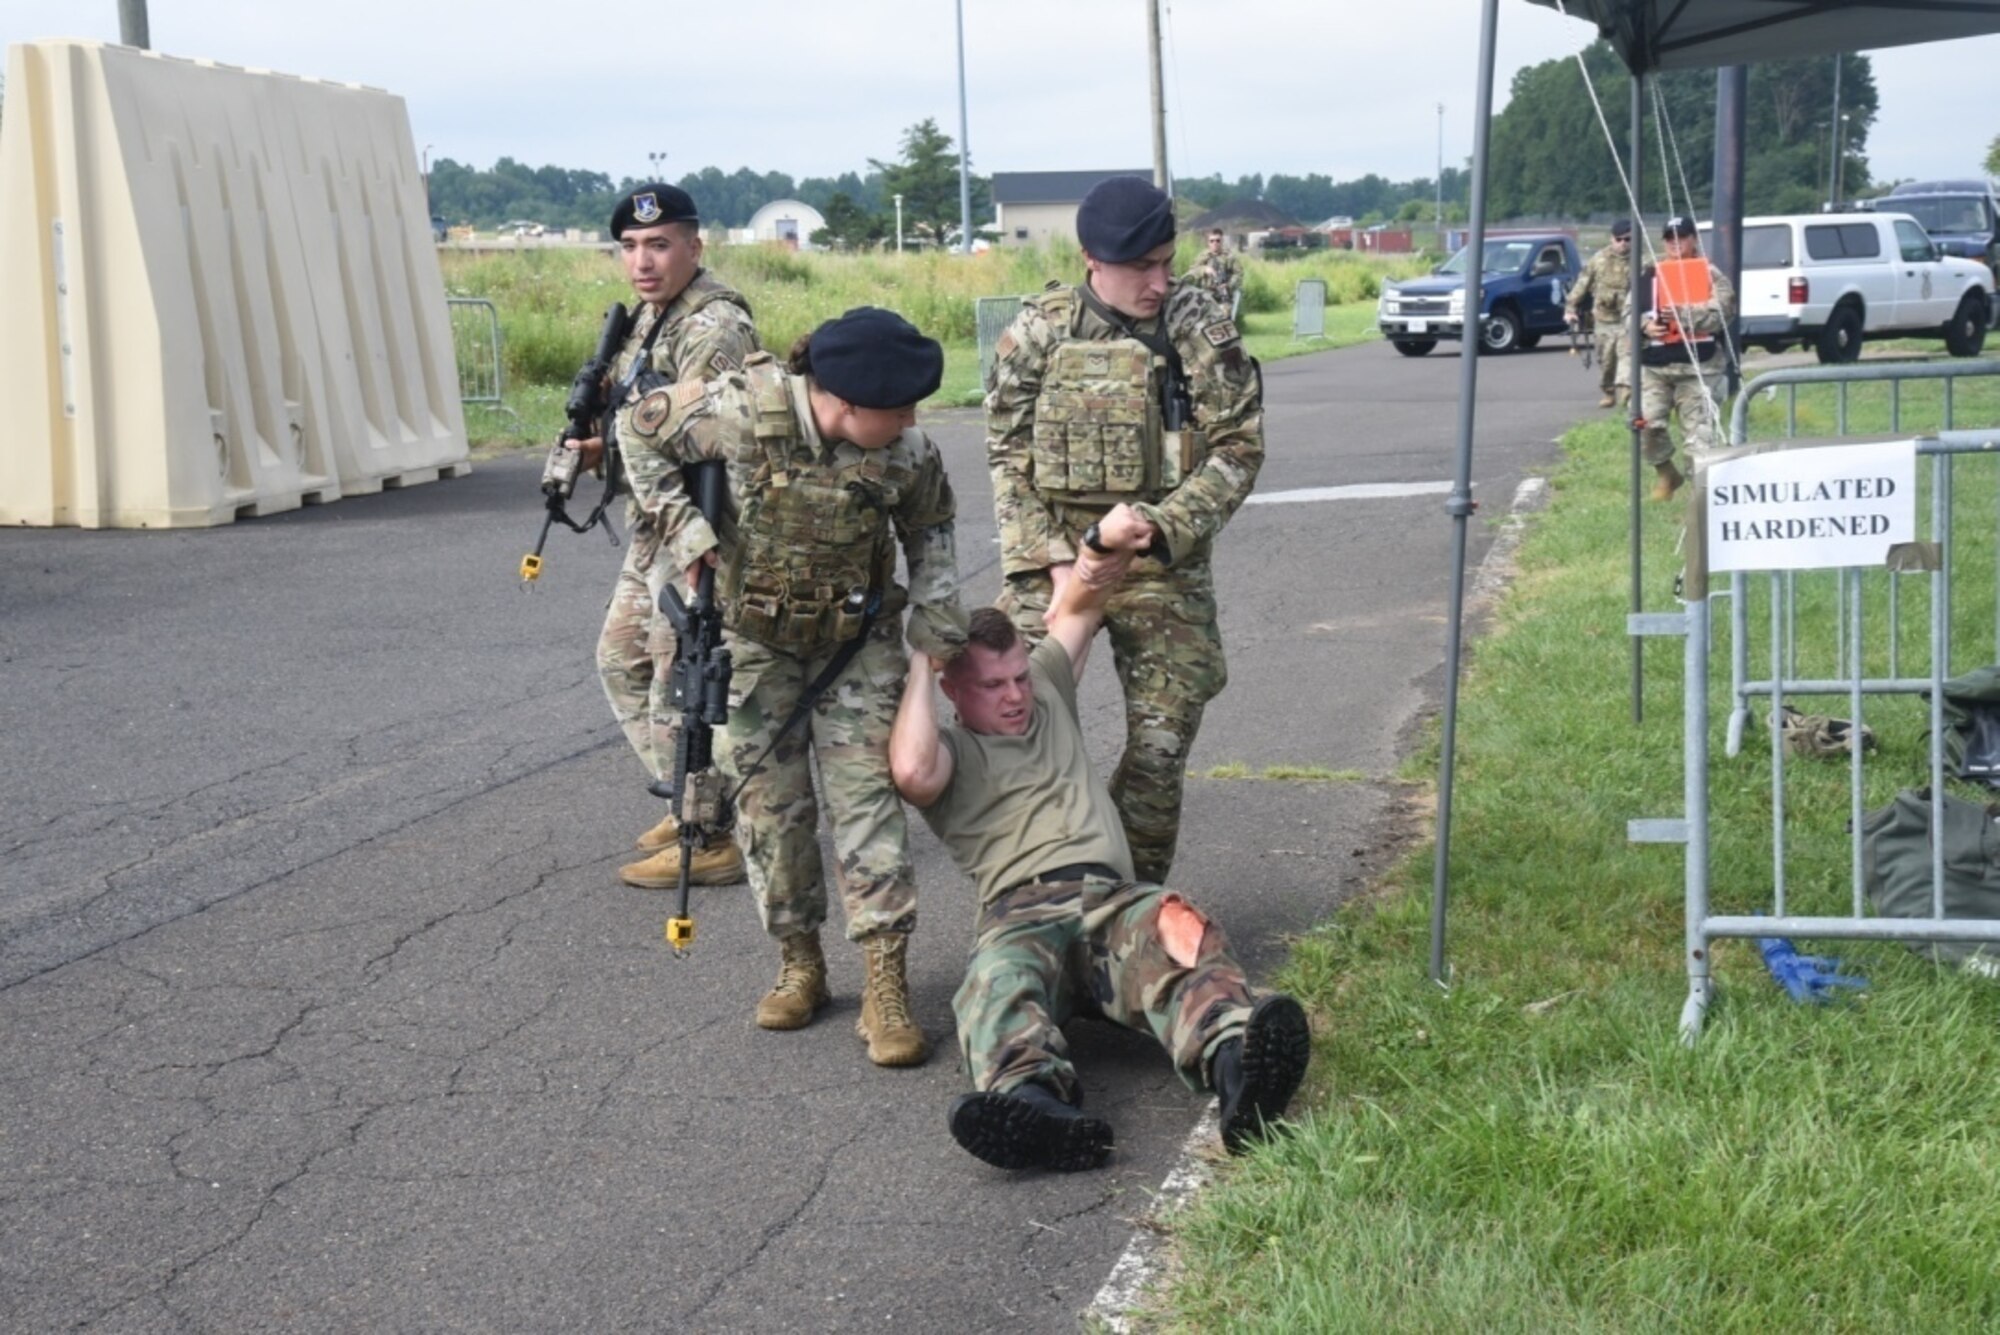 Three military personnel in uniform pull a simulated casualty to safety.